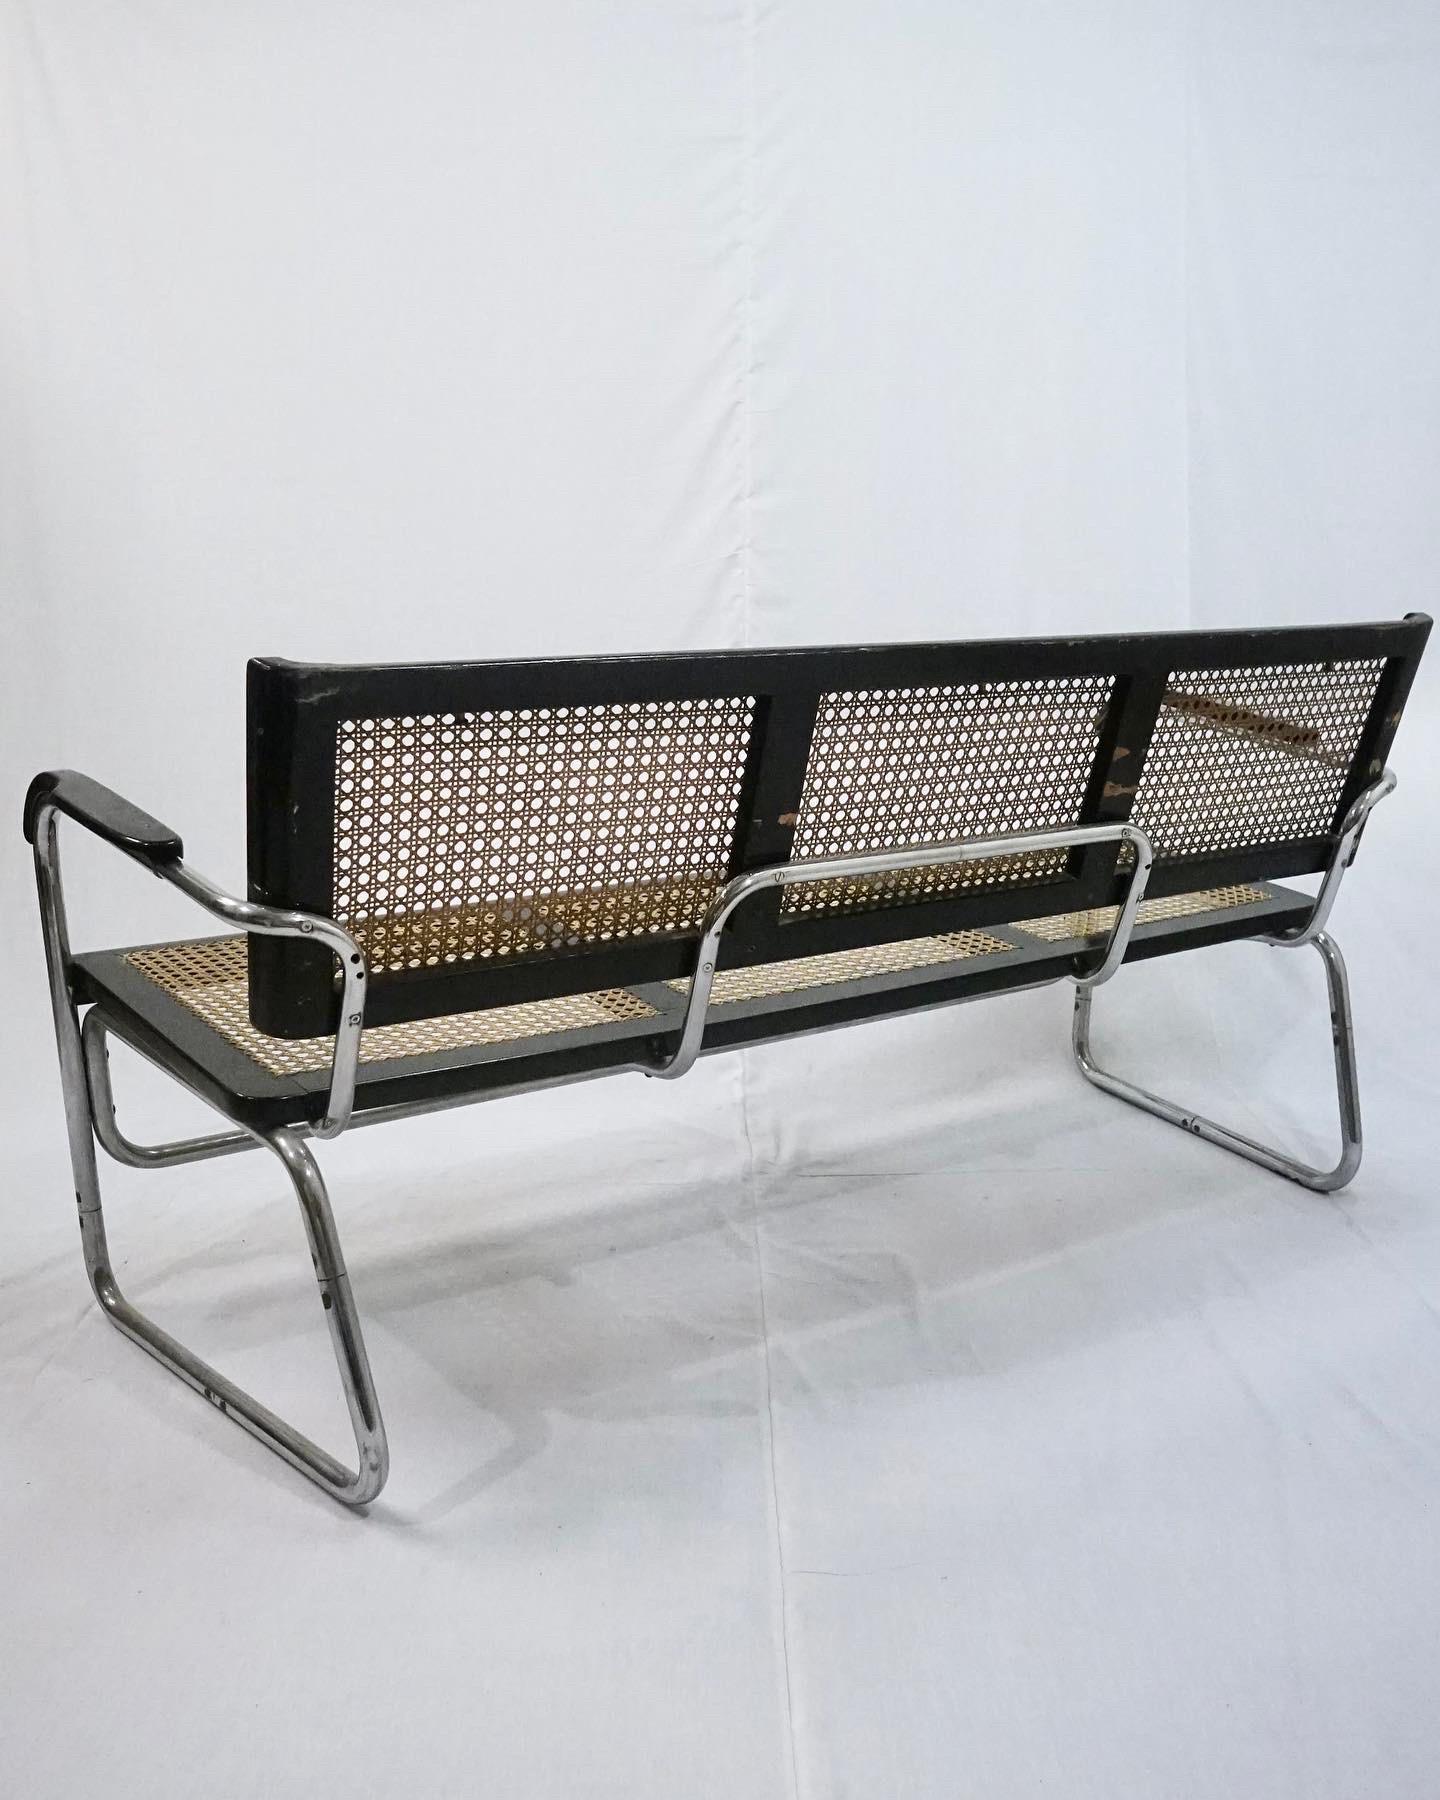 Rare and very important steel tube bench manufactured in 1932 by Fritz Hansen and attributed to the danish architect Frits Schlegel who worked together with Fritz Hansen from the early 1930’s until the 1940’s, this bench is a variation of the model